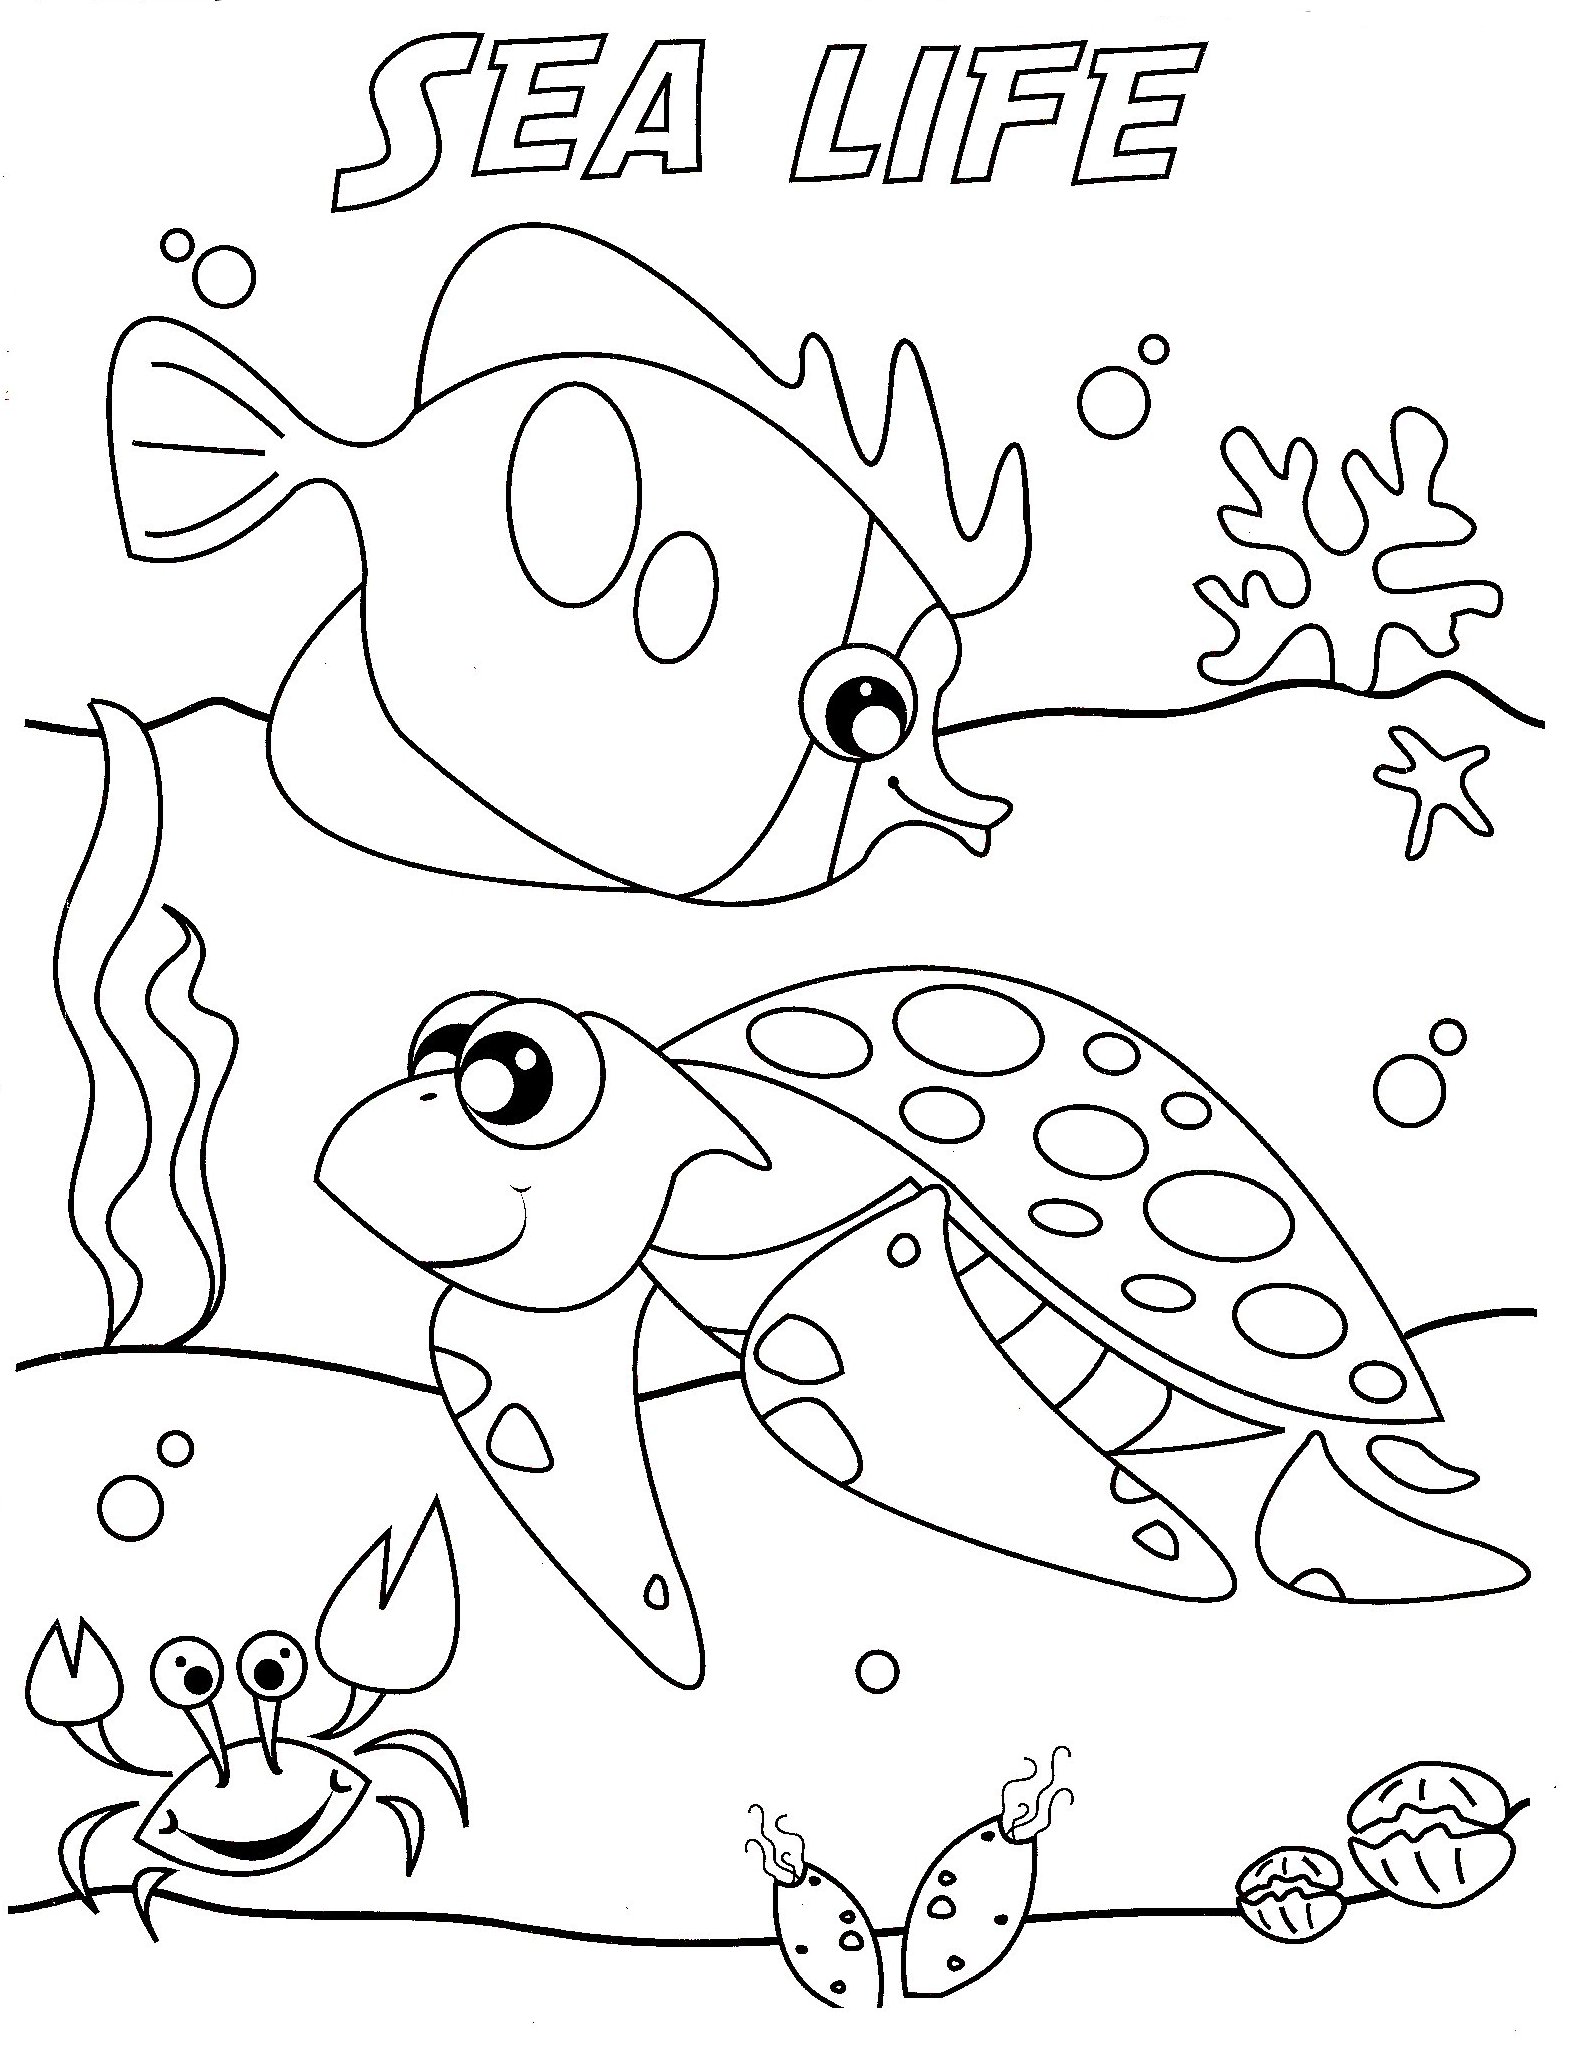 sea-life-coloring-pages-free-under-the-sea-coloring-pages-to-print